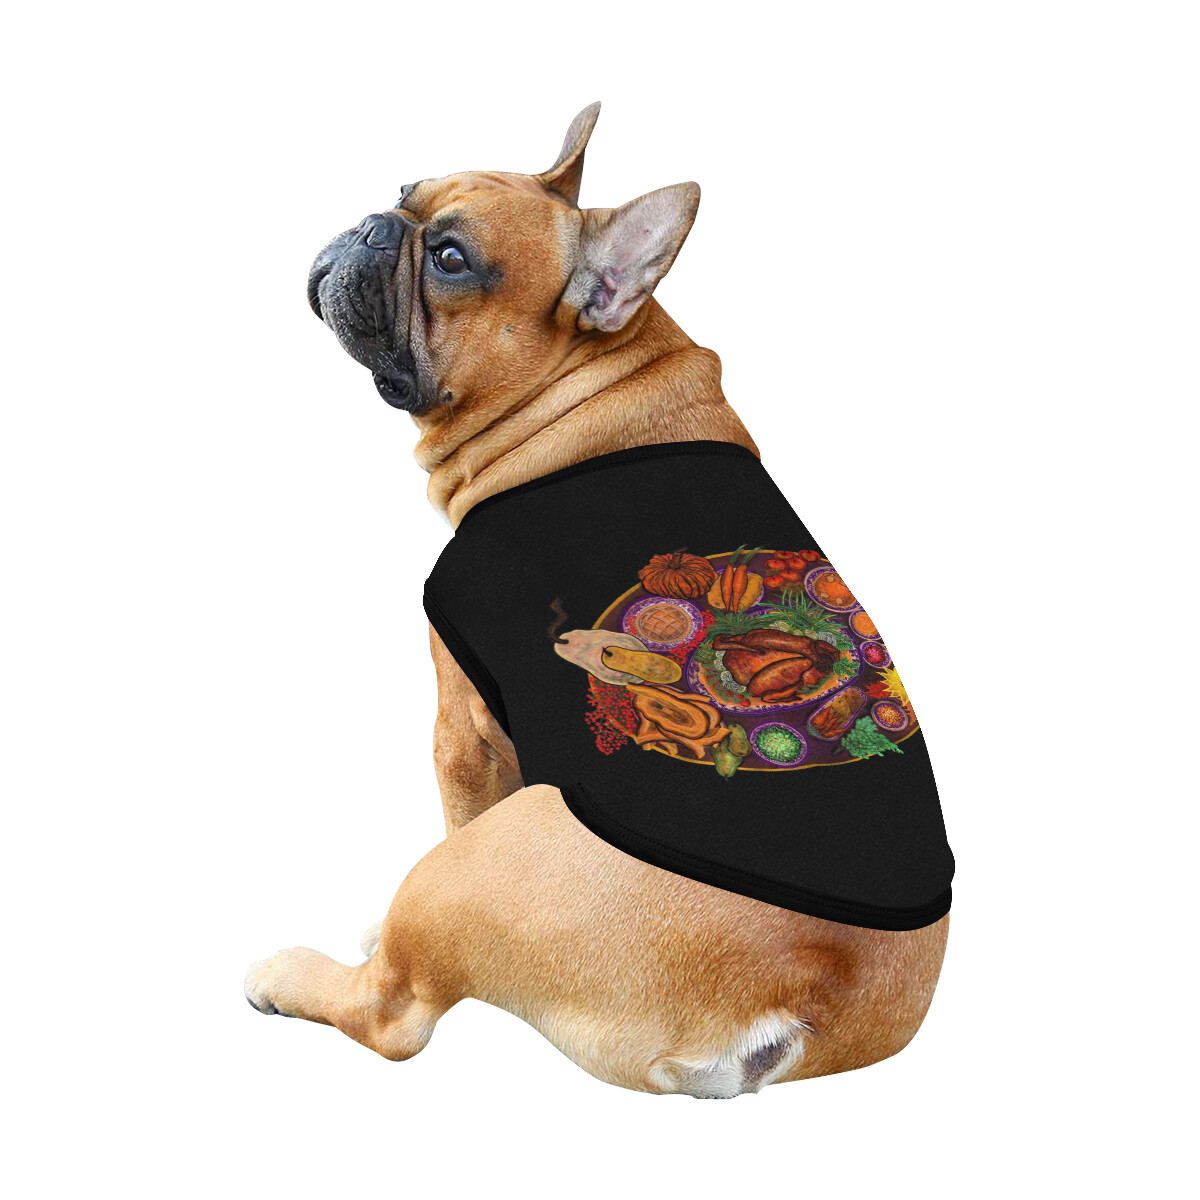 🐕 Thanksgiving Christmas dinner feast Dog shirt, Dog Tank Top, Dog t-shirt, Dog clothes, Gifts, front back print, 7 sizes XS to 3XL, dog gifts, black